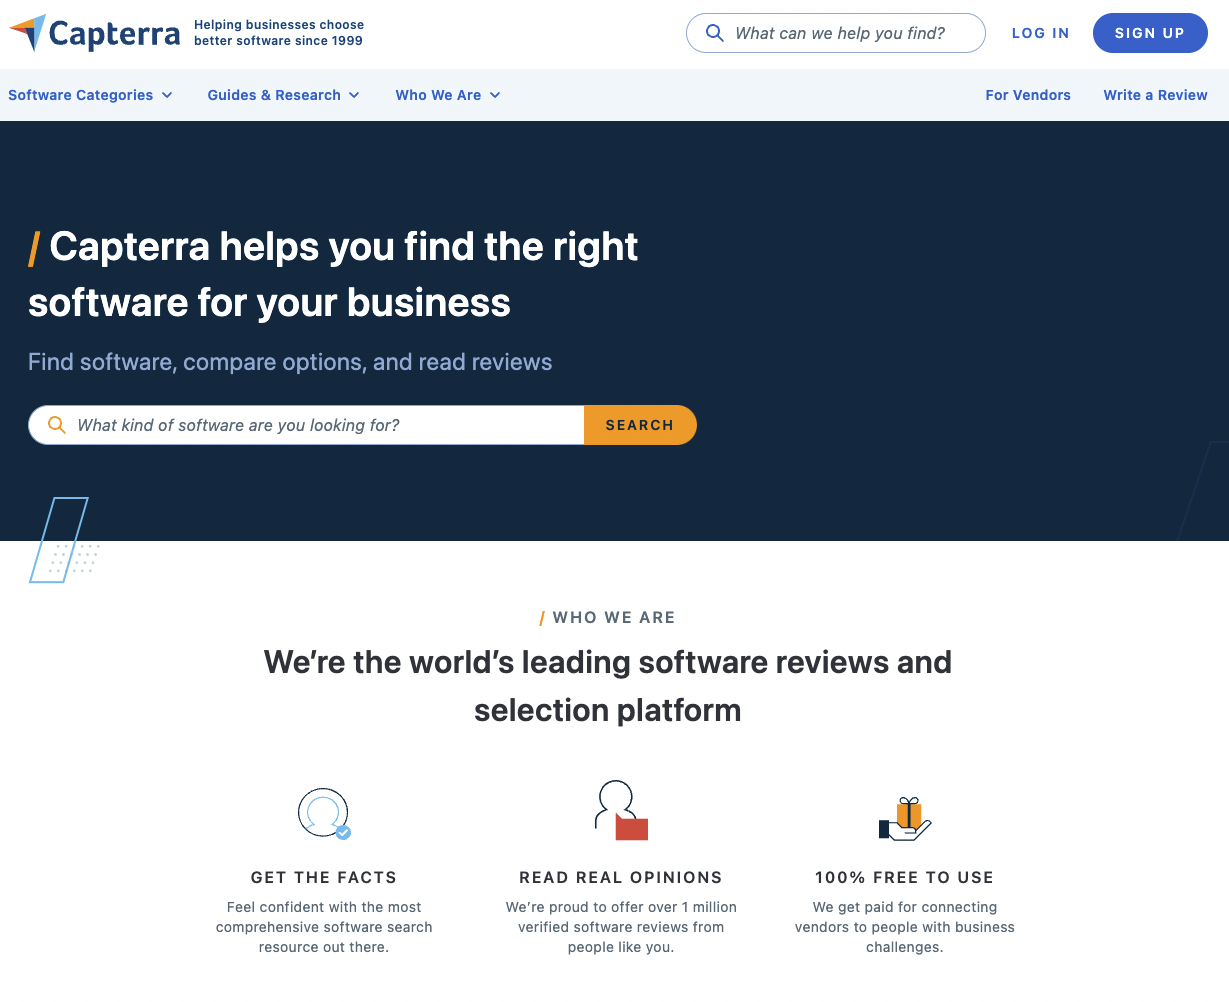 Capterra's SEO Strategy - How SaaS Companies Can Benefit from Their Success